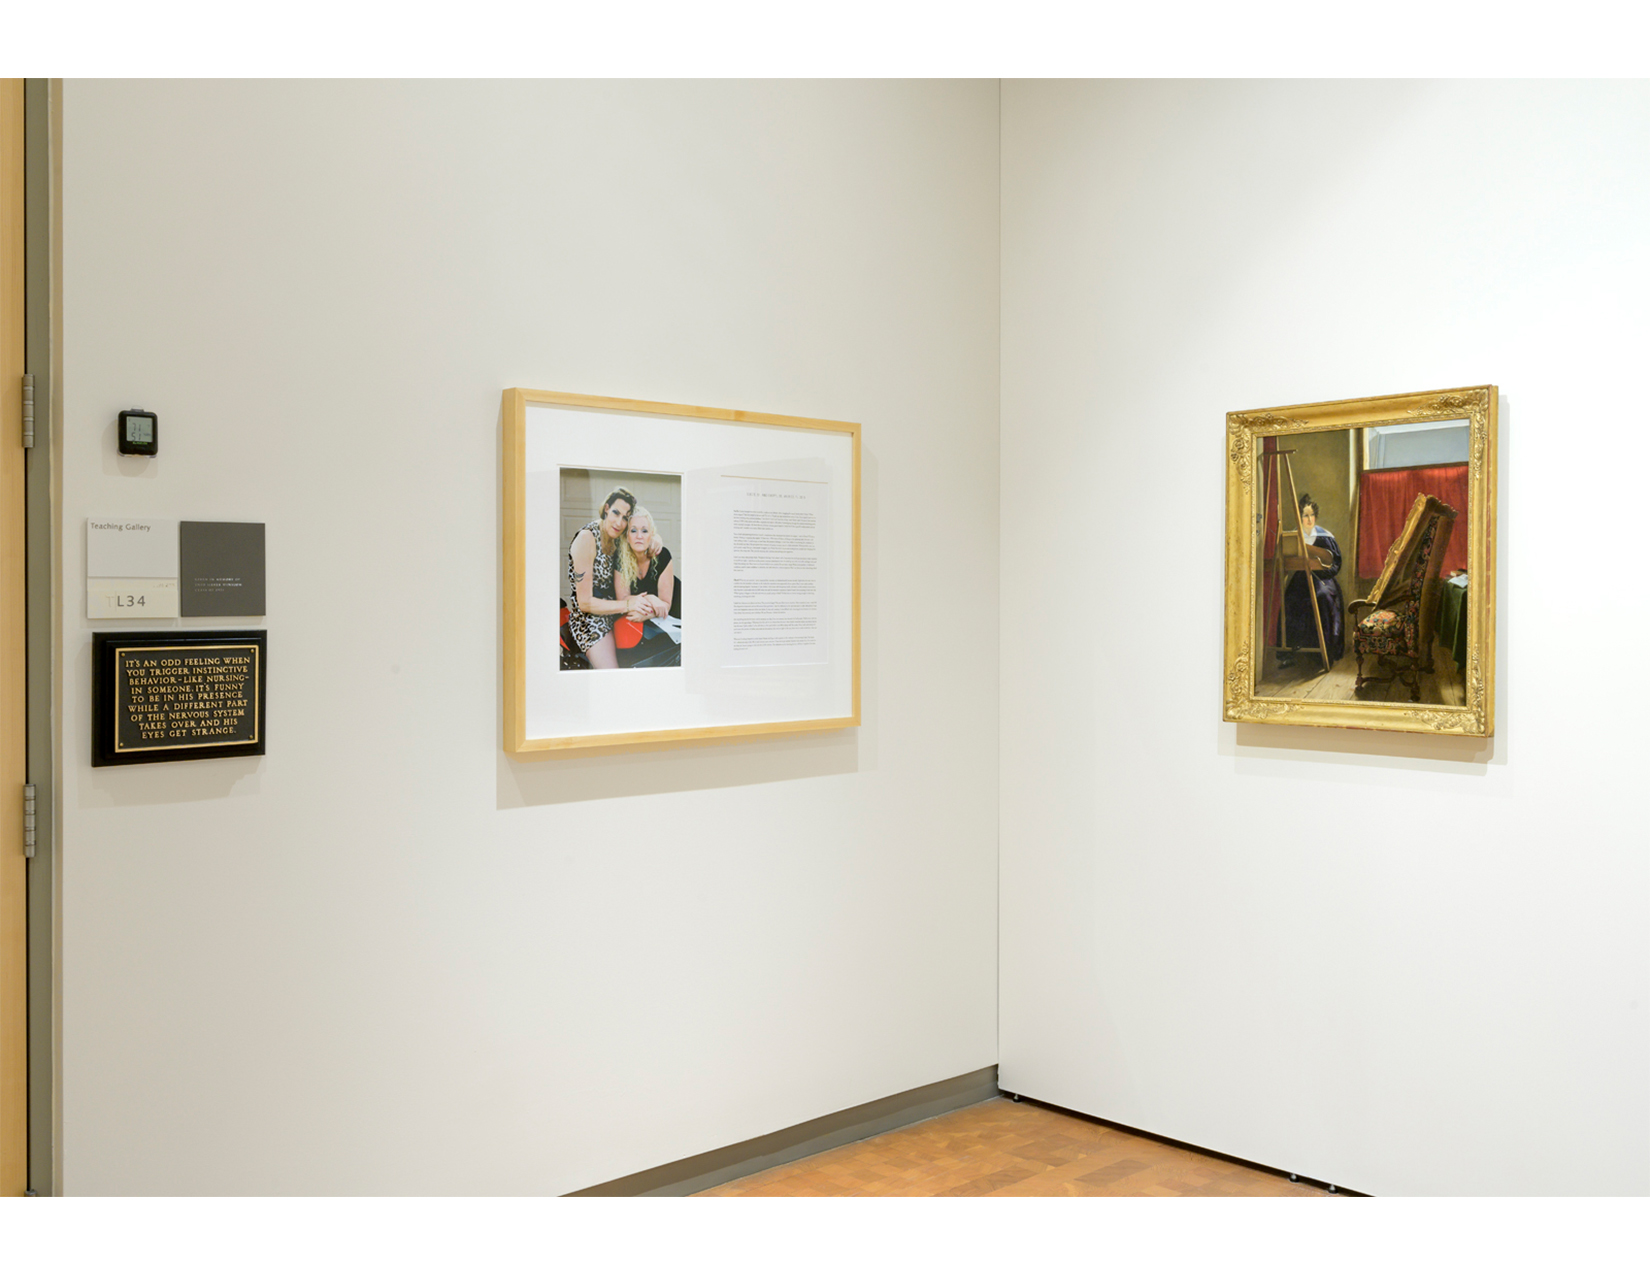 an art gallery with white walls, displaying three works of art. from left to right: a black plaque with gold words; an image of a couple embracing on a motorcycle, displayed next to a block of text; and a portrait of a woman painting 